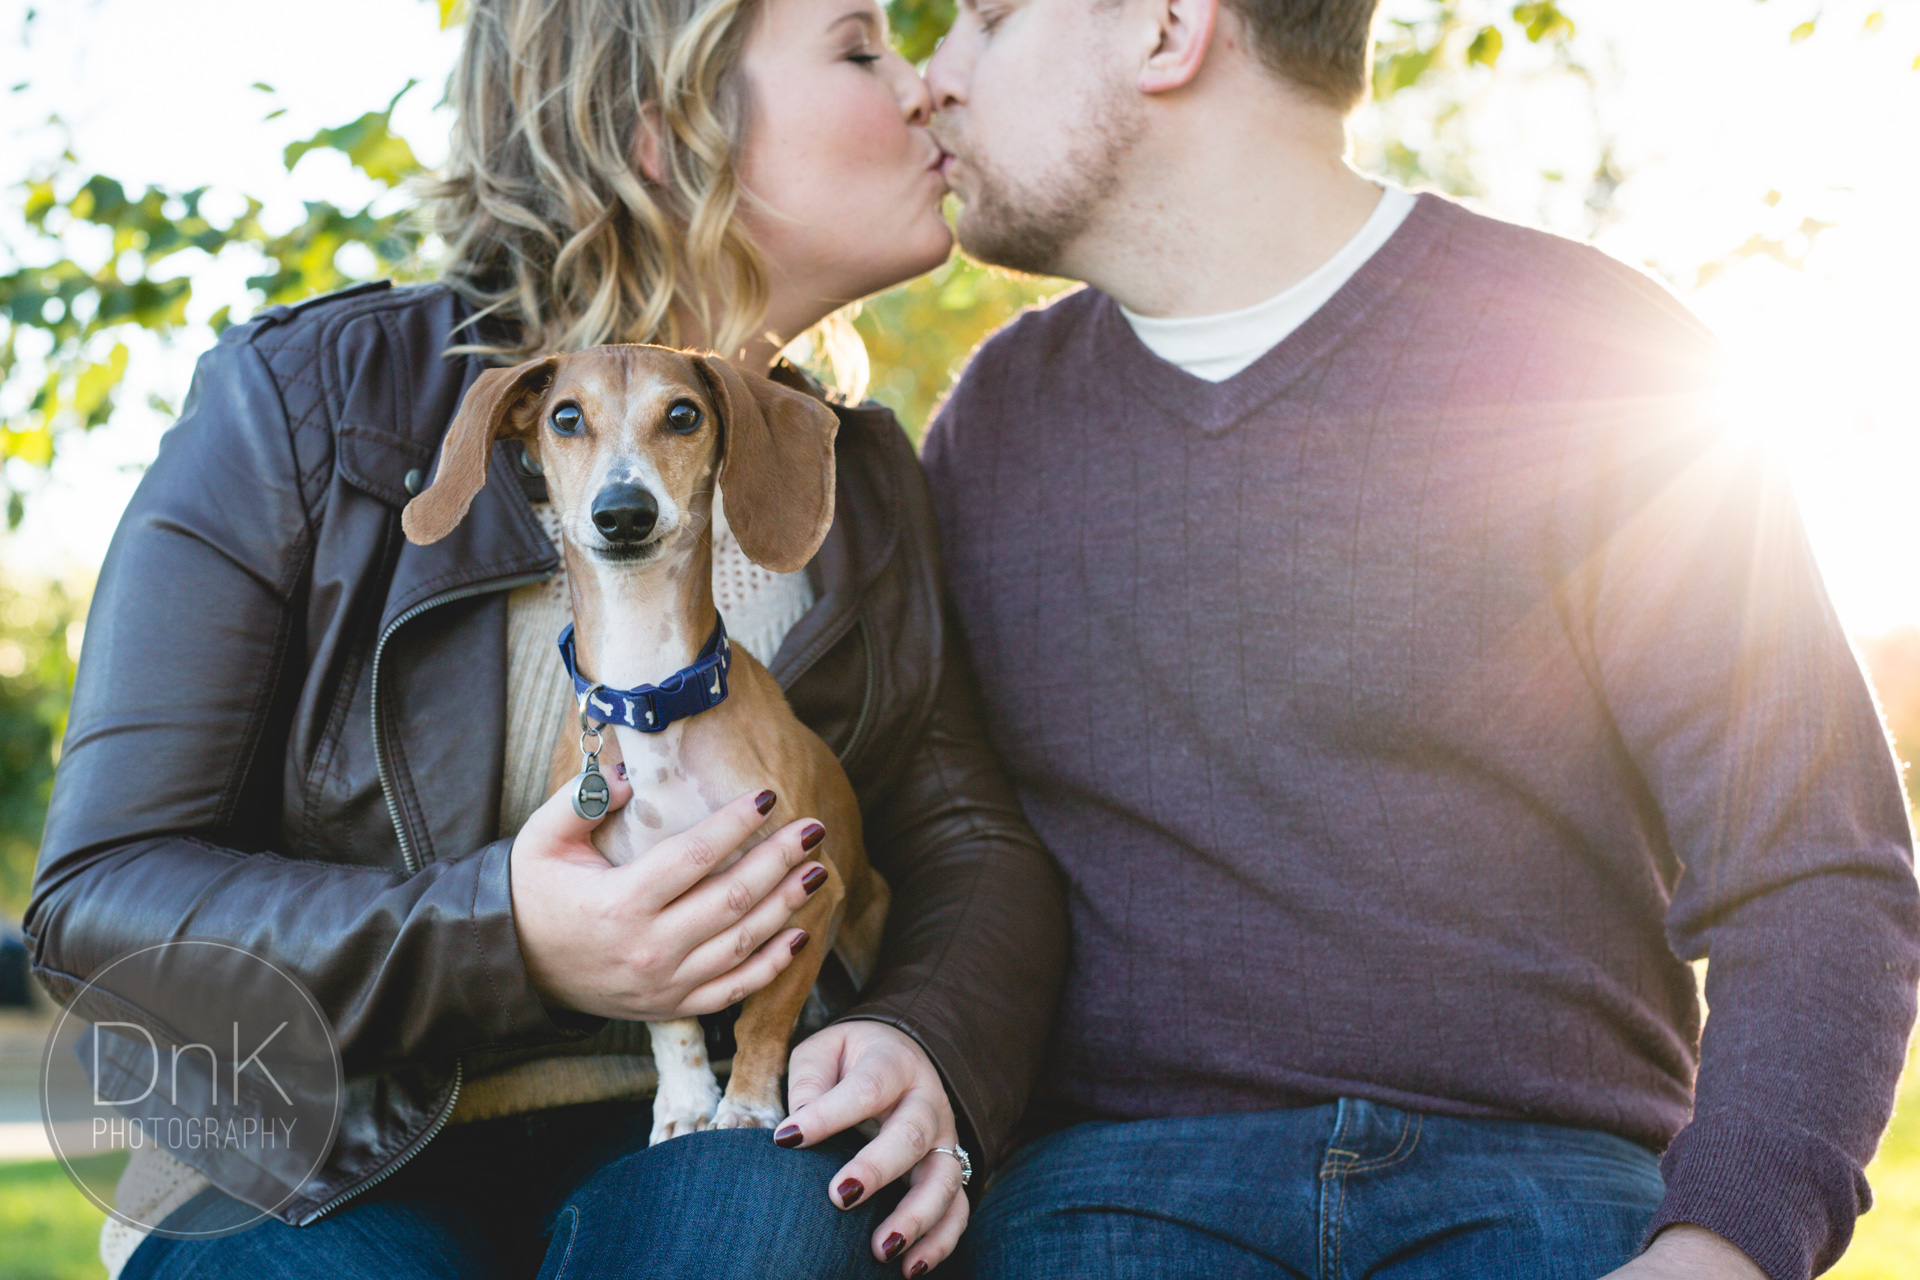 Pet Engagement Photography - DnK Photography